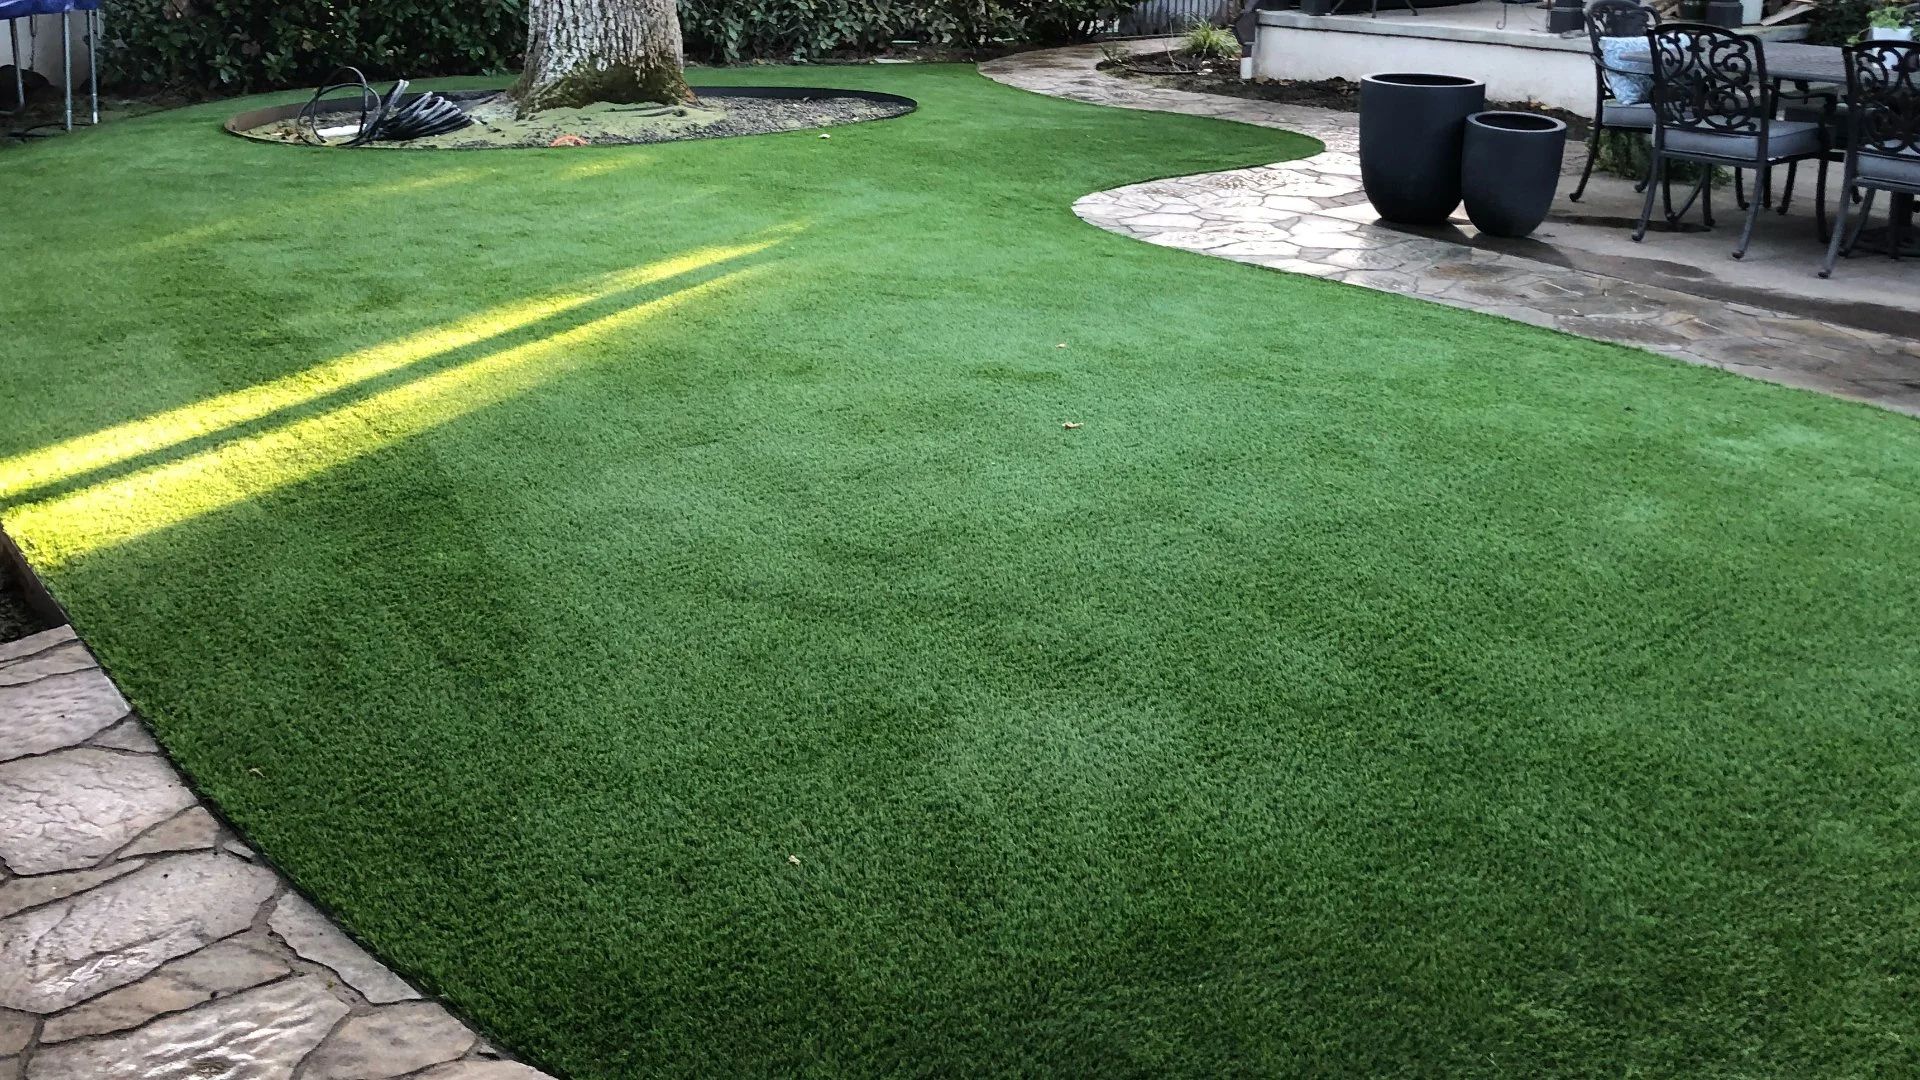 Choosing the Right Artificial Turf Type for Your Property: 3 Things To Consider